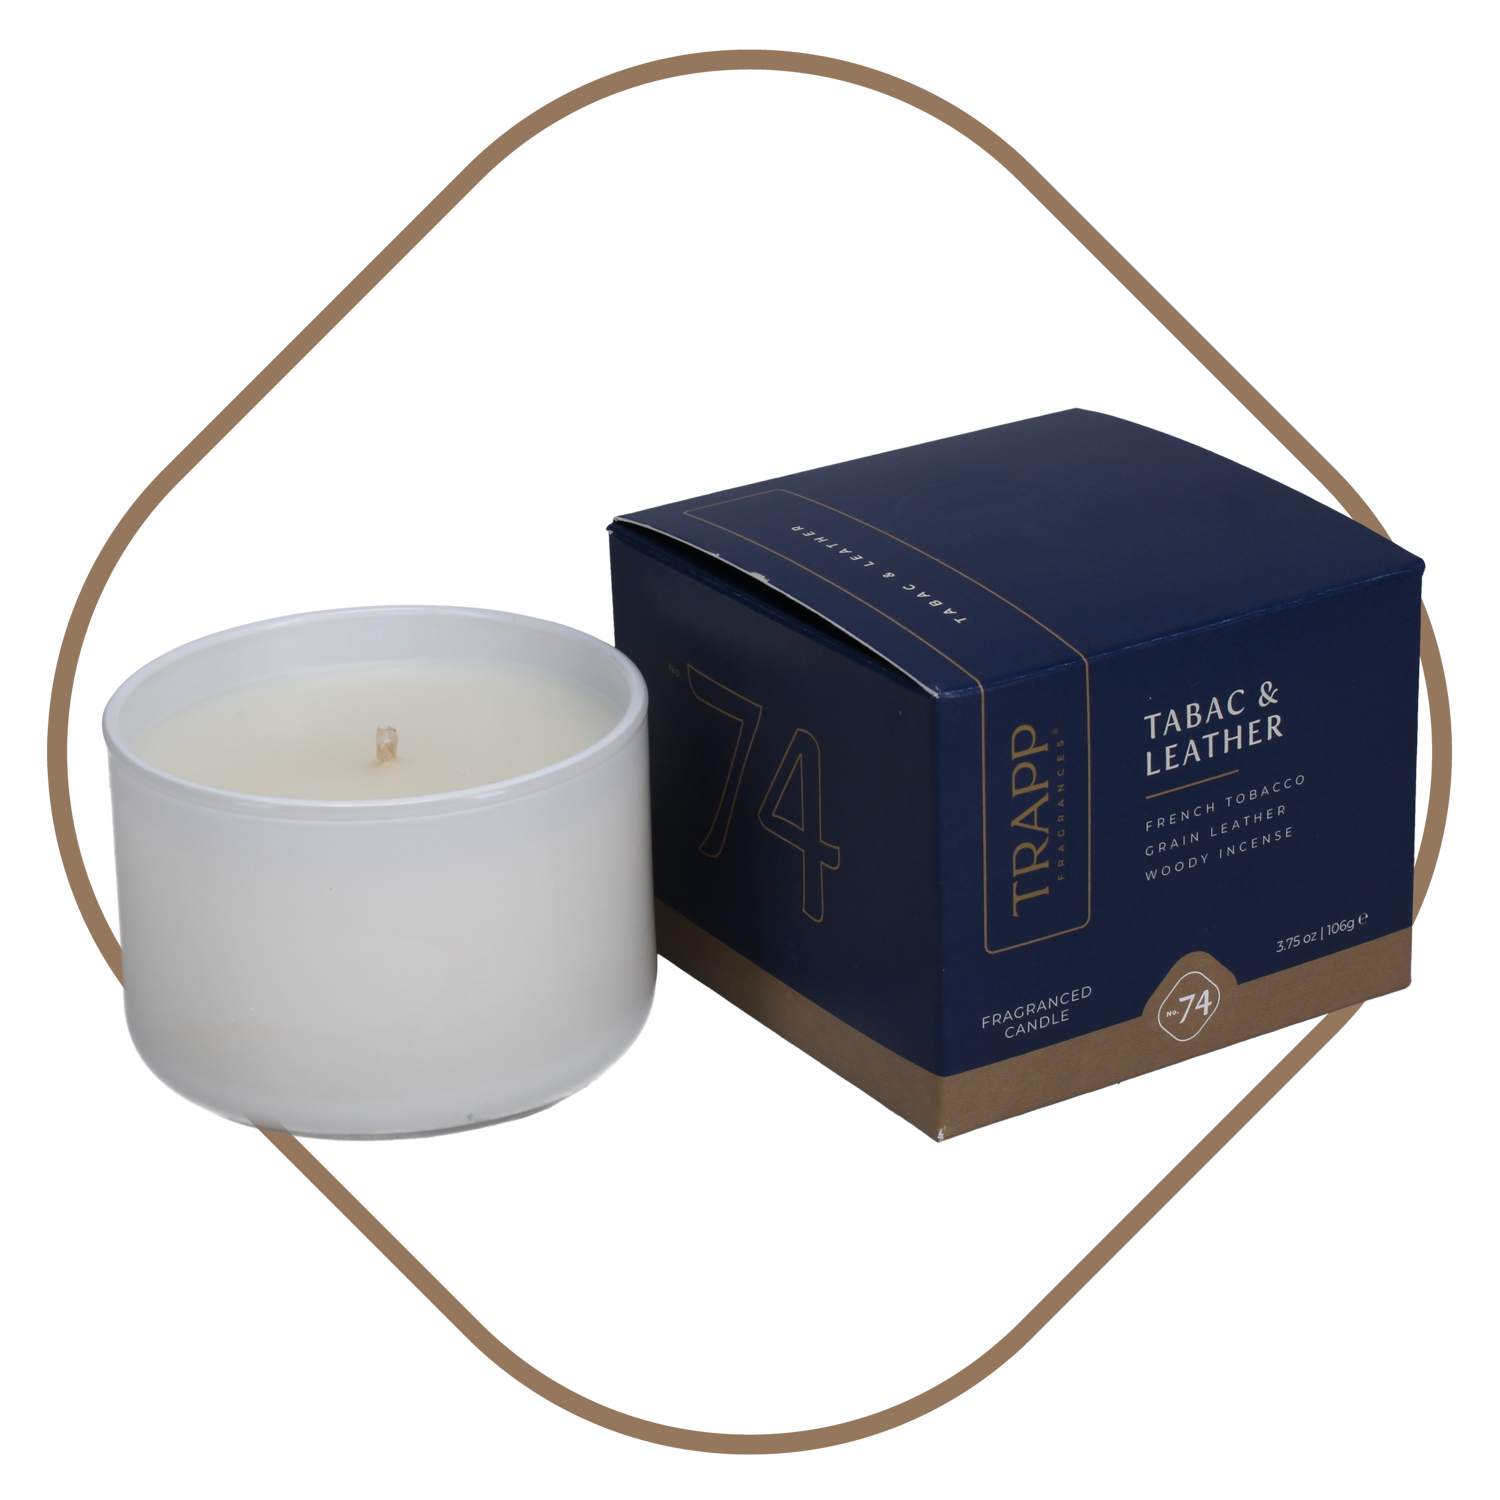 No. 74 Tabac & Leather 3.75 oz. Small Poured Candle